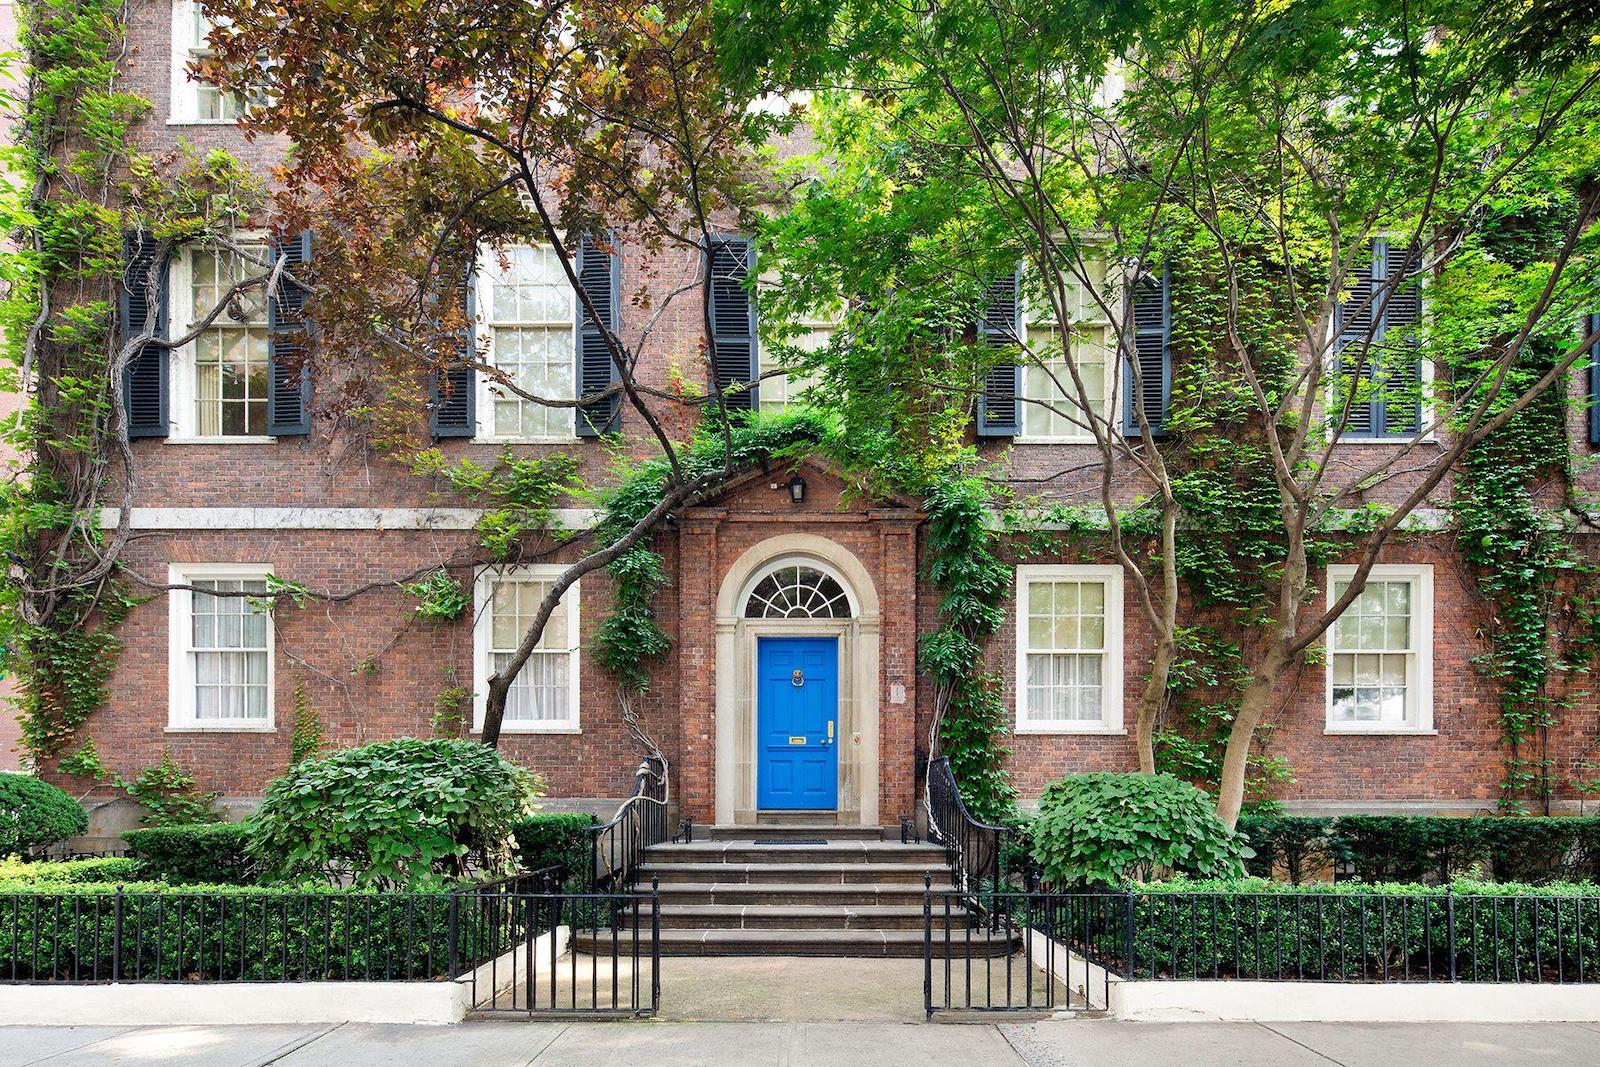 NYC Mansion Tax townhouse on Sutton Place